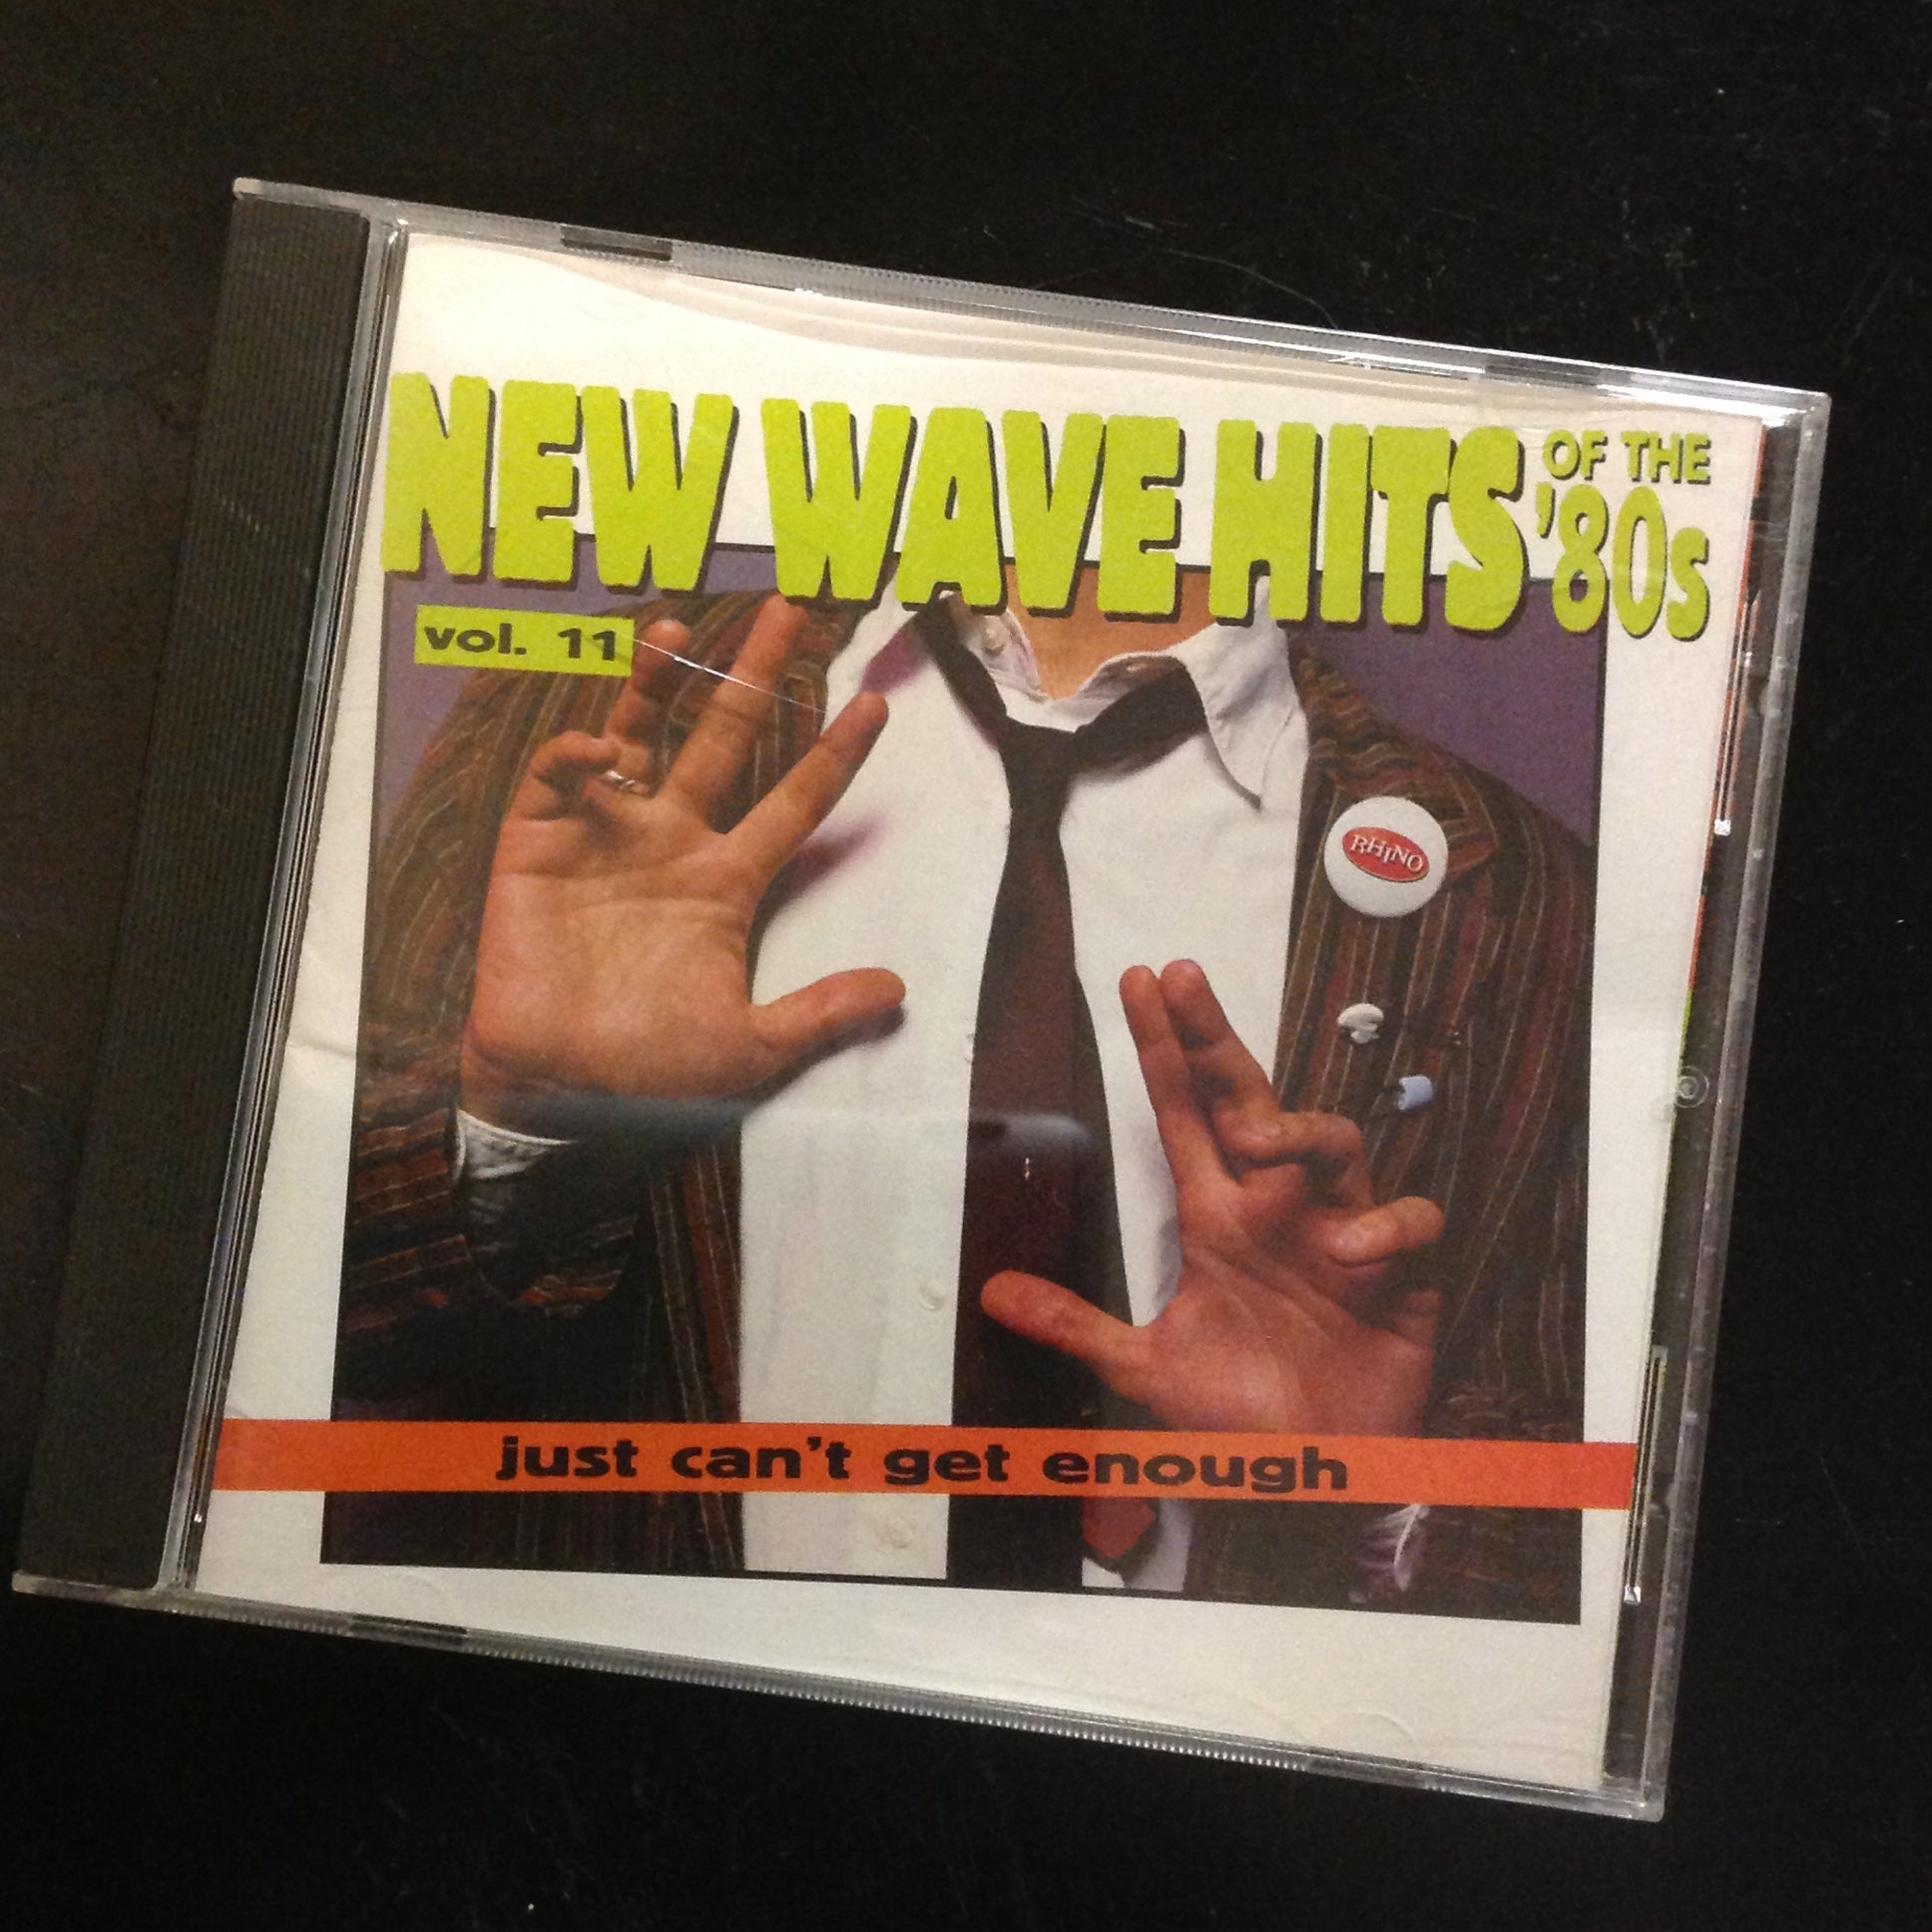 CD New Wave Hits of the 80's Vol. 11 R2 71974 Just Can't Get Enough Rhino 1995 Various Artists Compilations